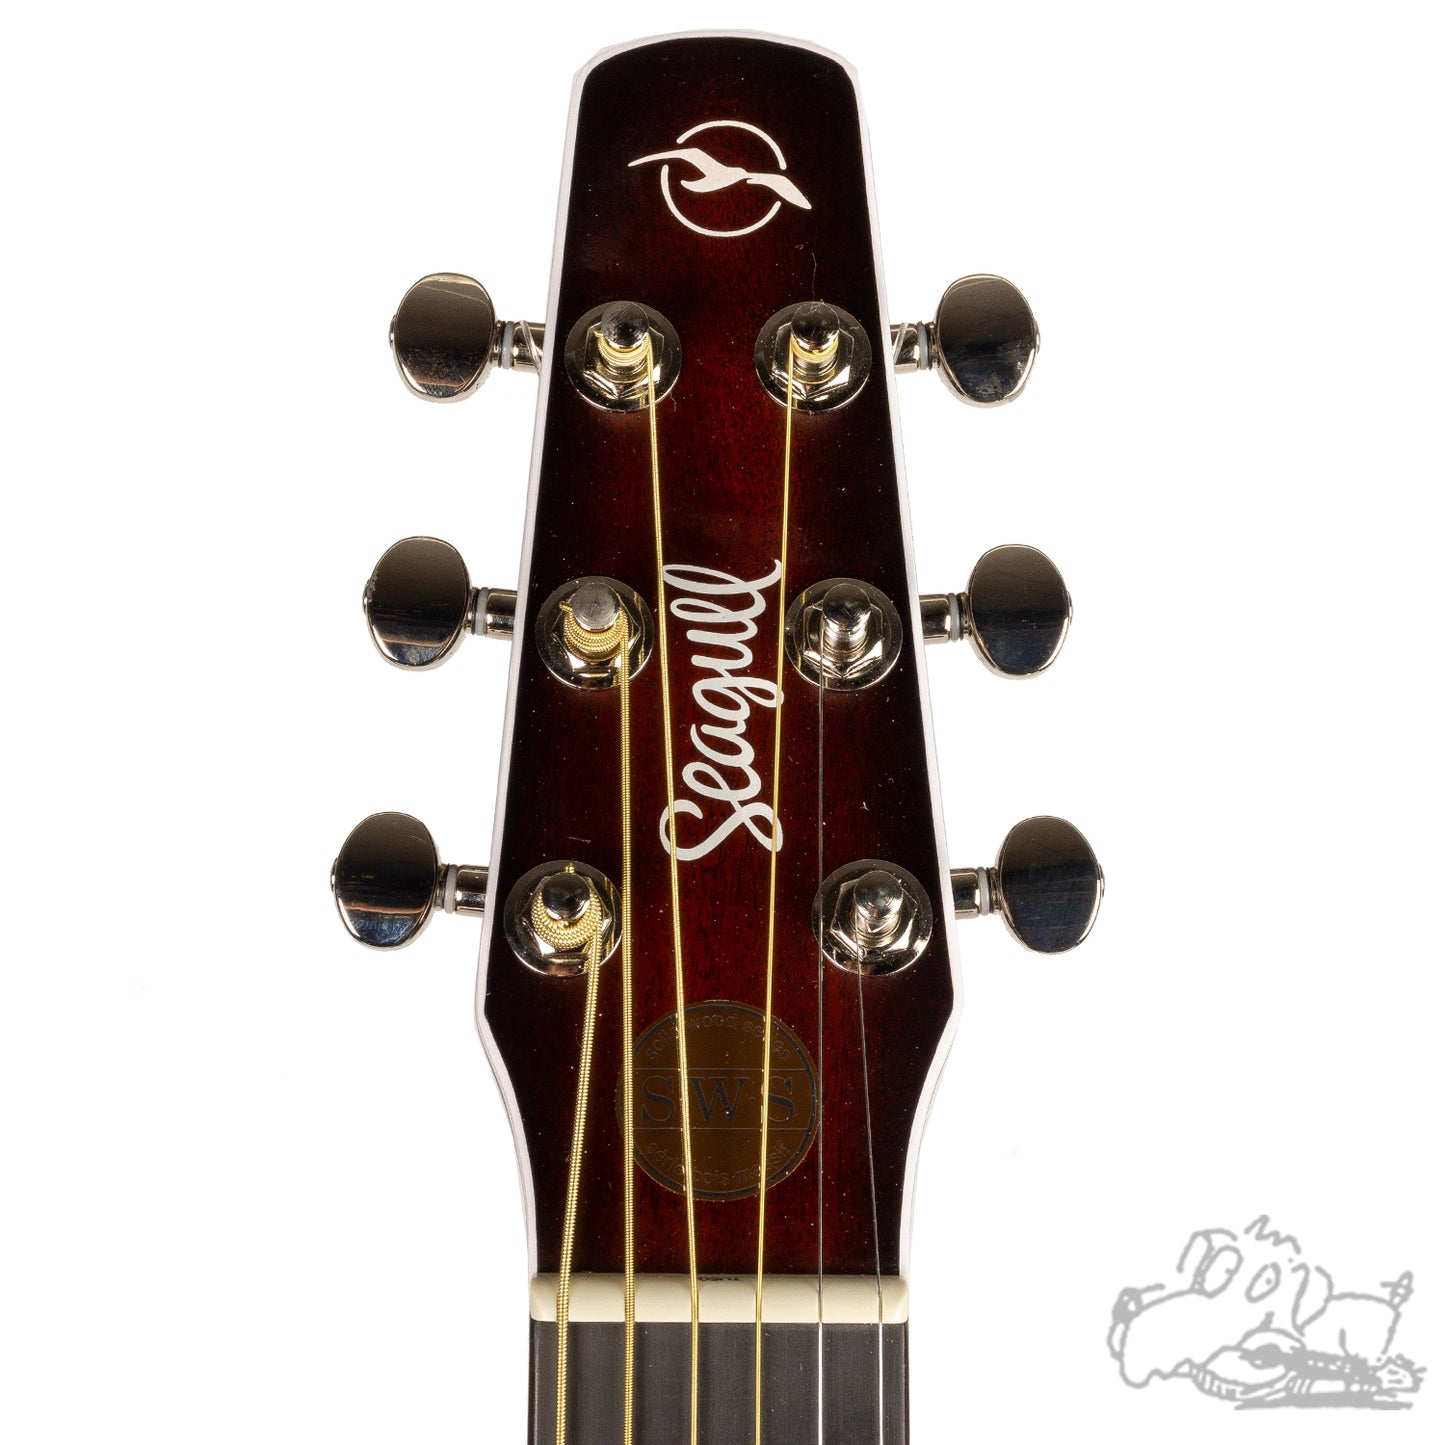 Seagull SWS Maritime Dreadnought - Used